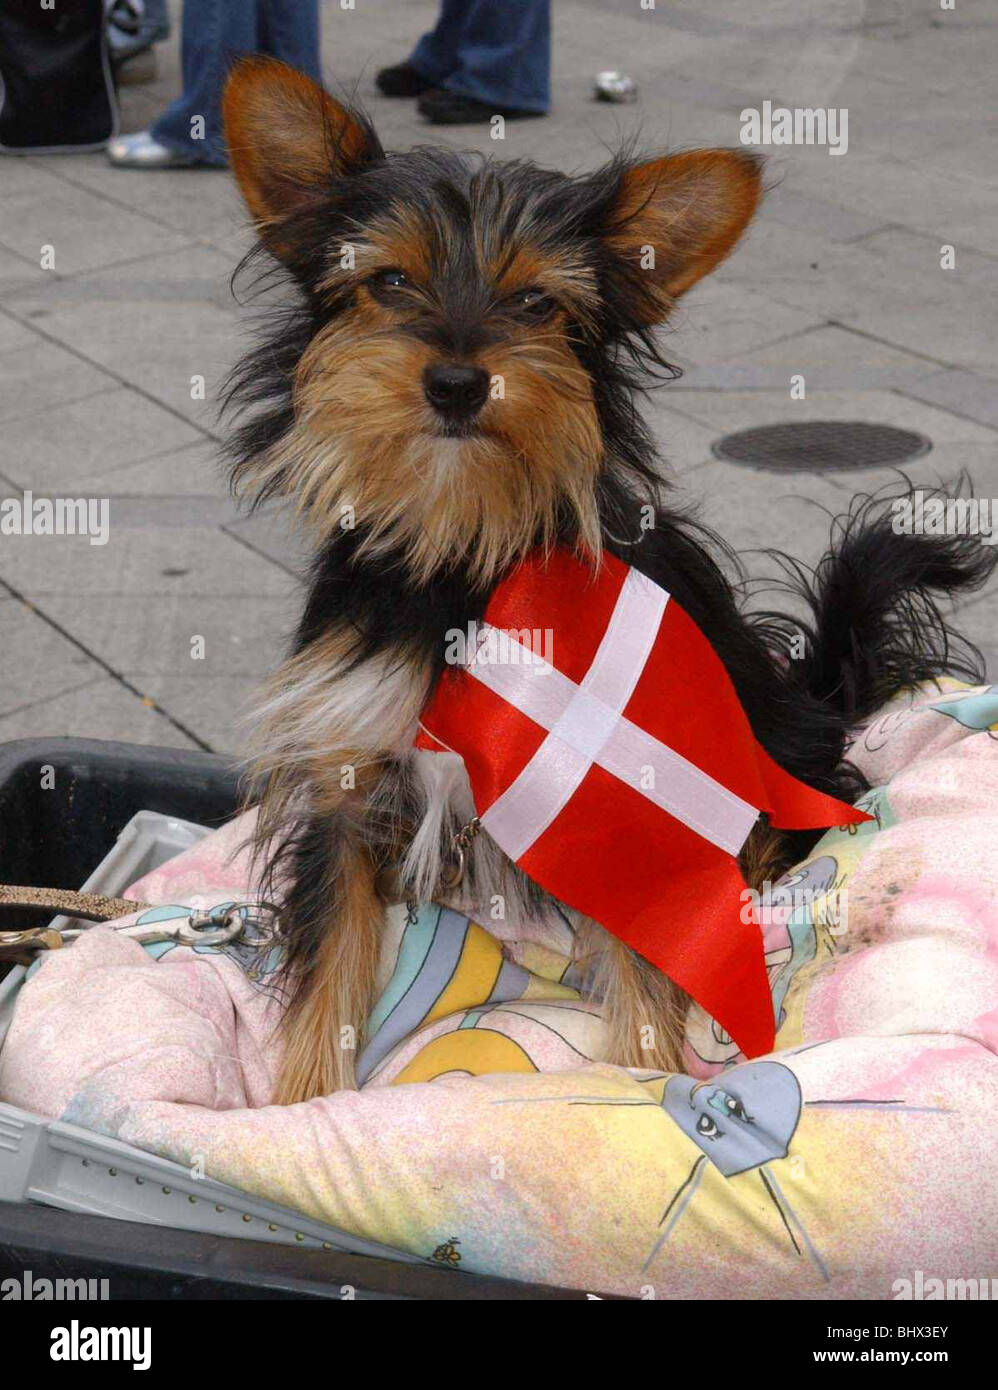 Football Fans Supporters June 2002 Pictured ahead of England v Denmark 2nd Round Match Danish dog fan in central Copenhagen Stock Photo